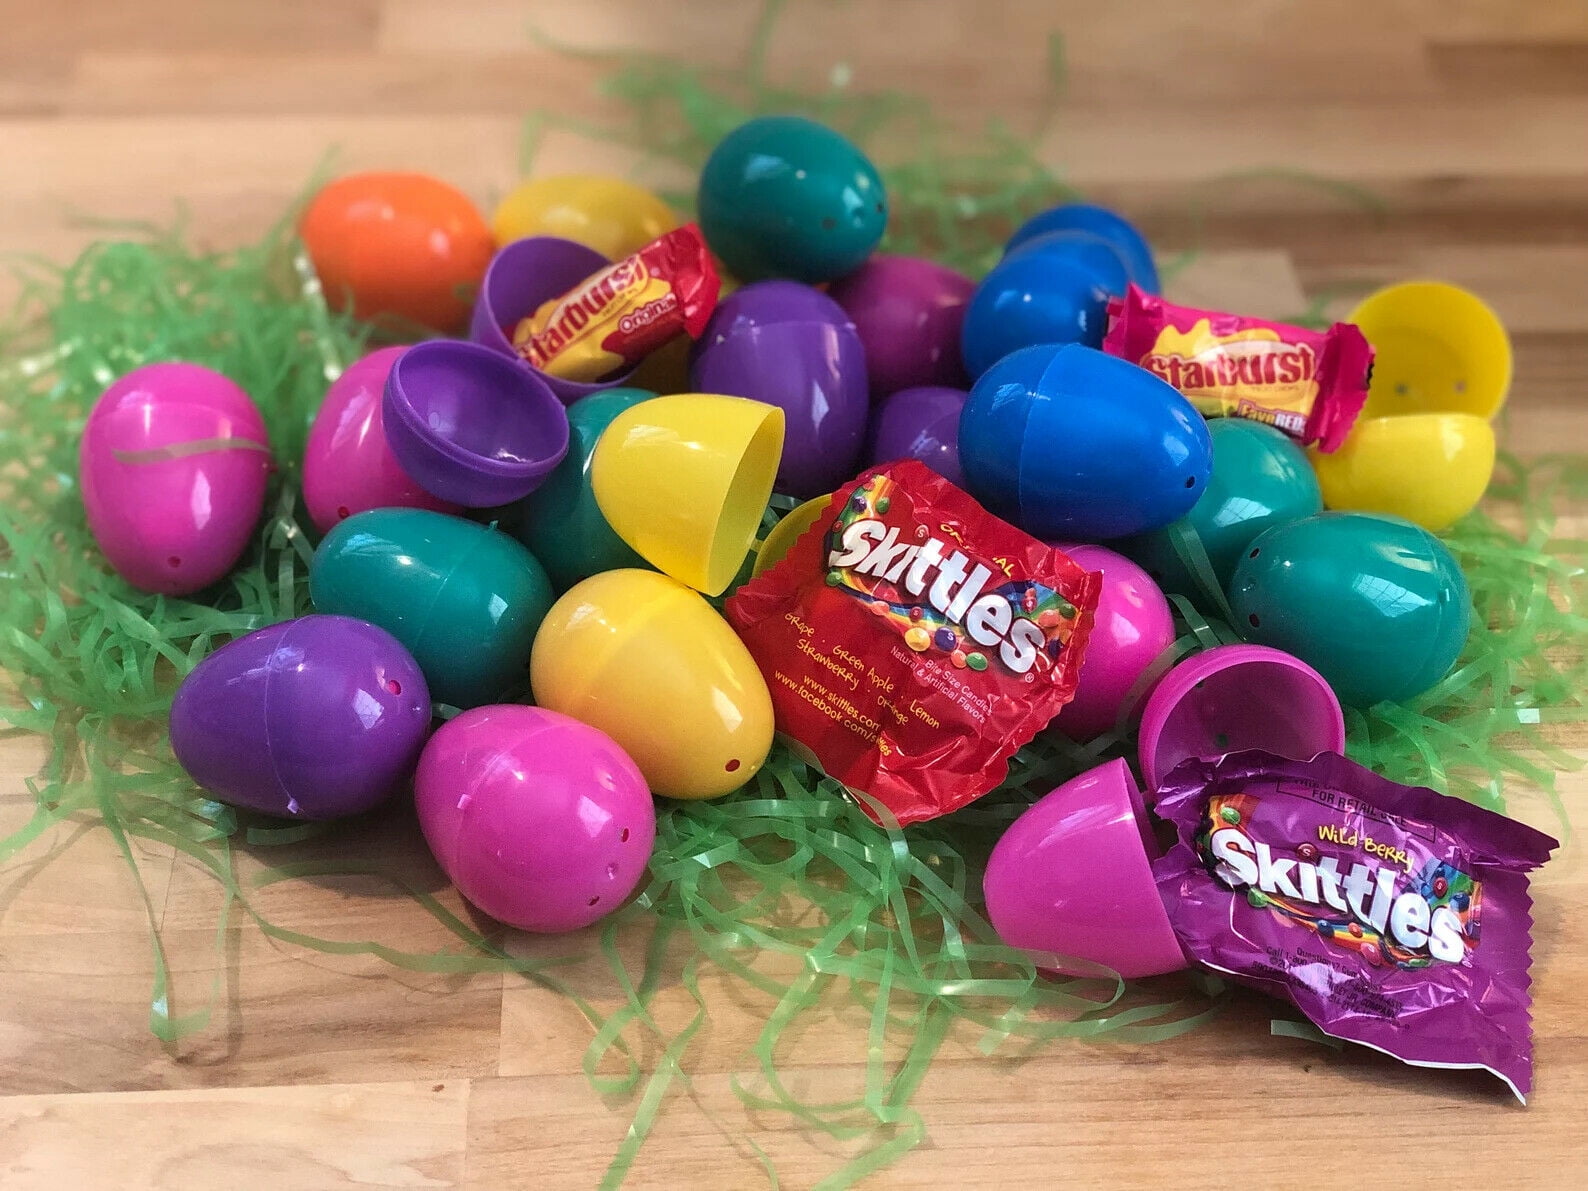 Pre-filled Easter Eggs, Egghunt Easter Eggs, candy-filled eggs with  Starbursts and Skittles 50 count - Walmart.com